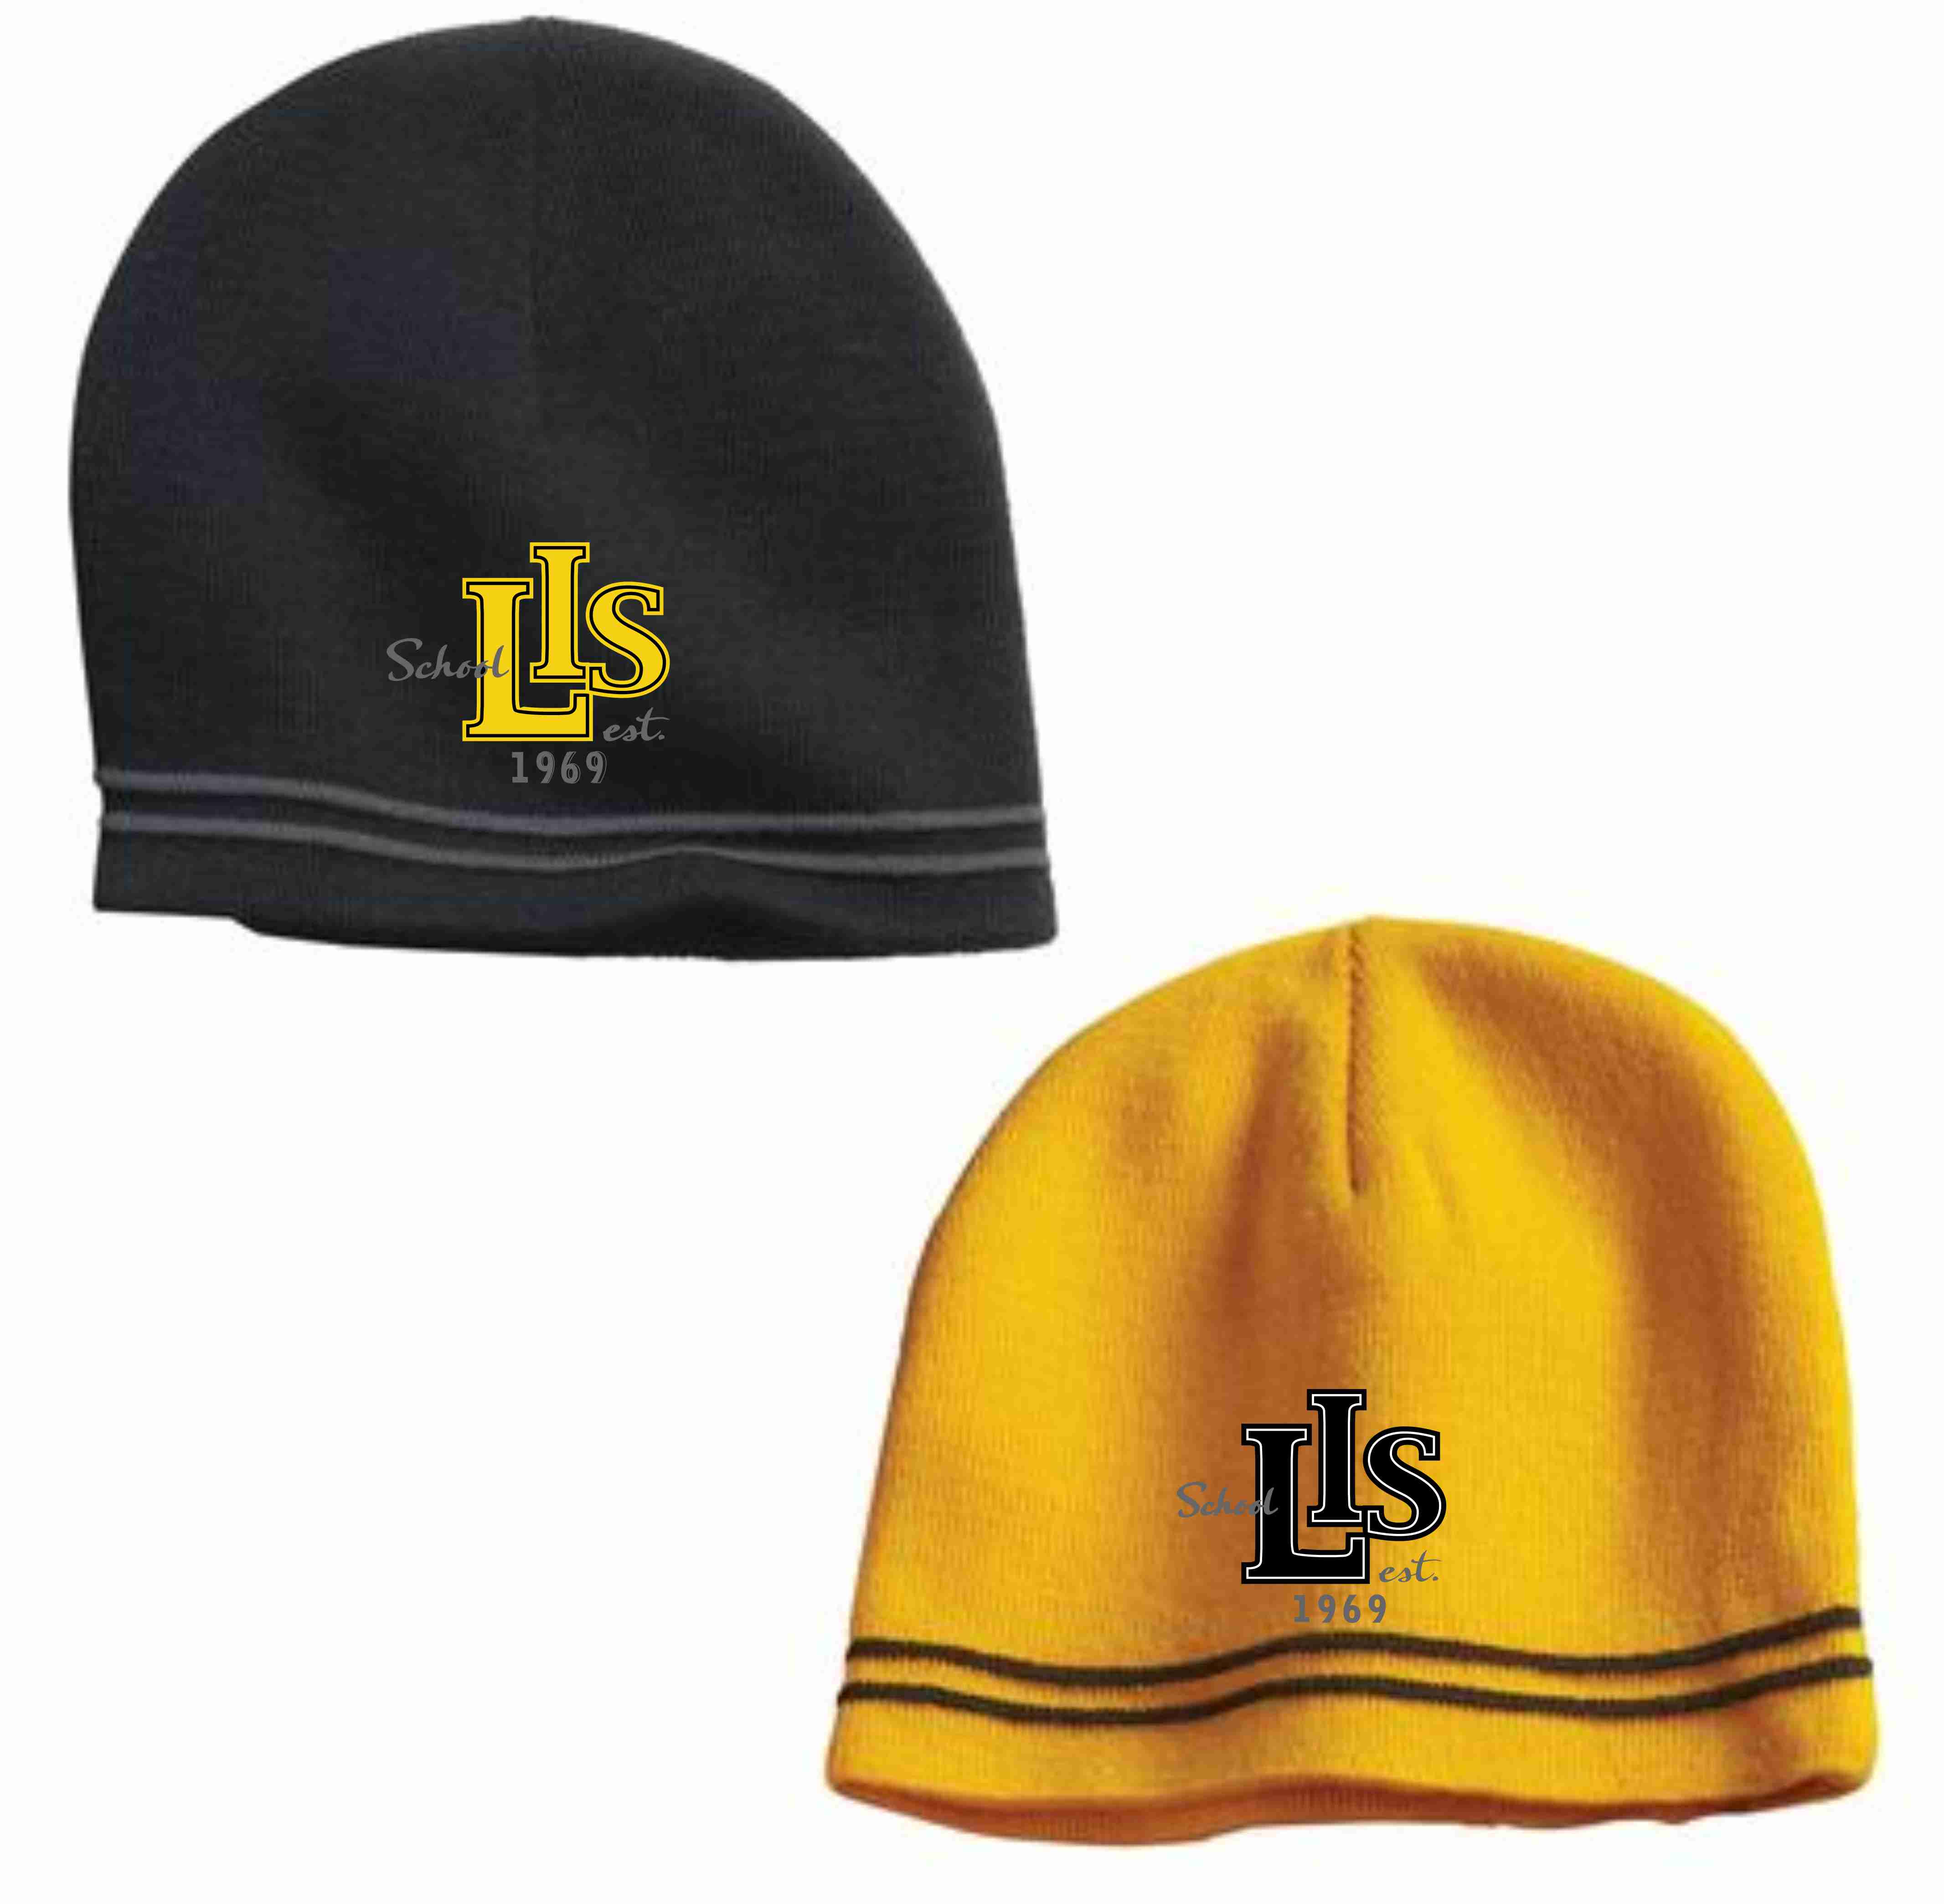 4-STC20 Embroidered Beanie